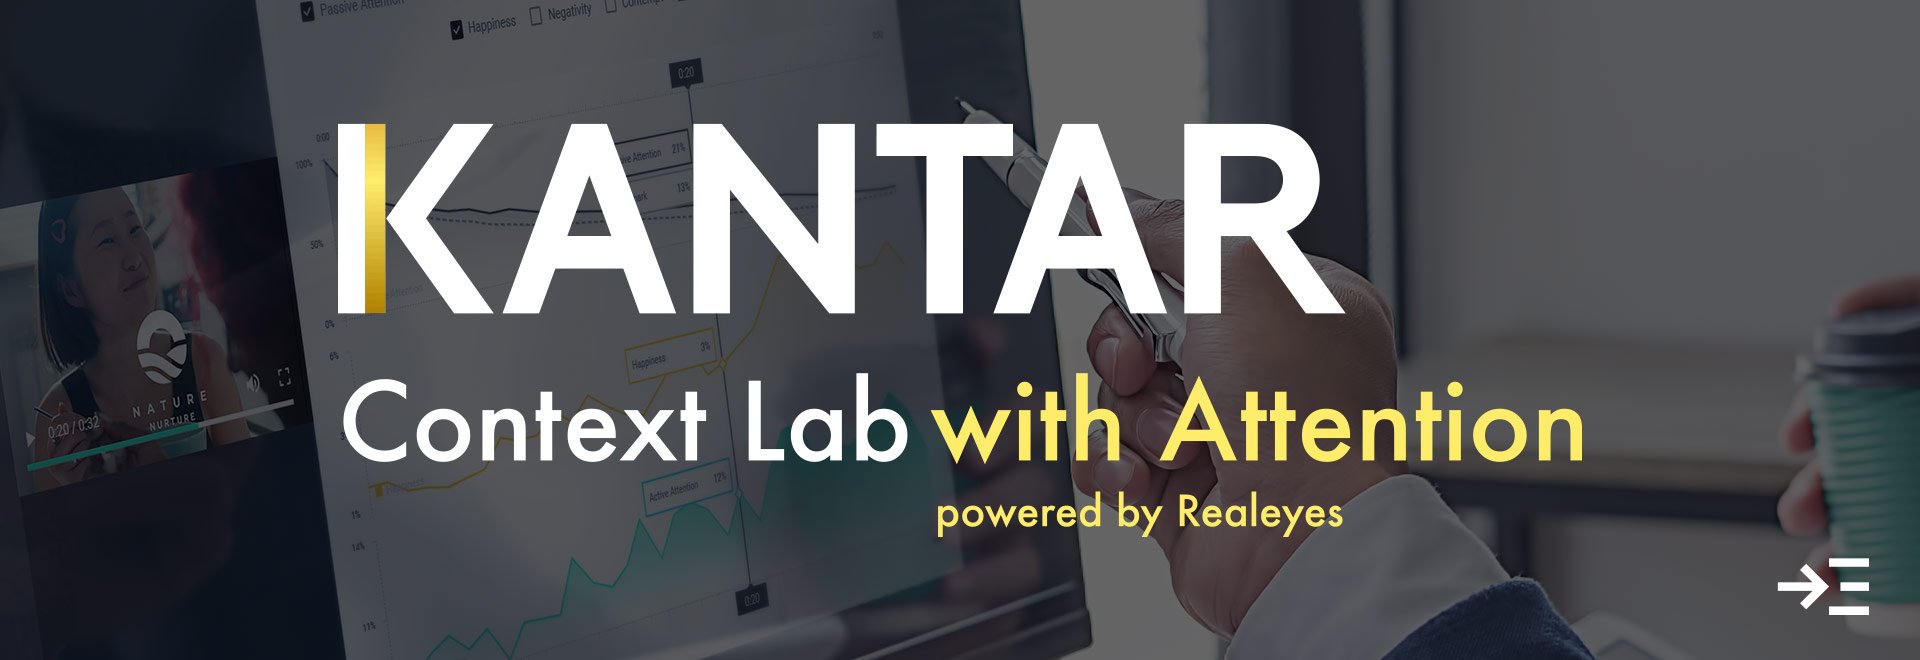 Kantar ContextLab with Attention Powered by Realeyes